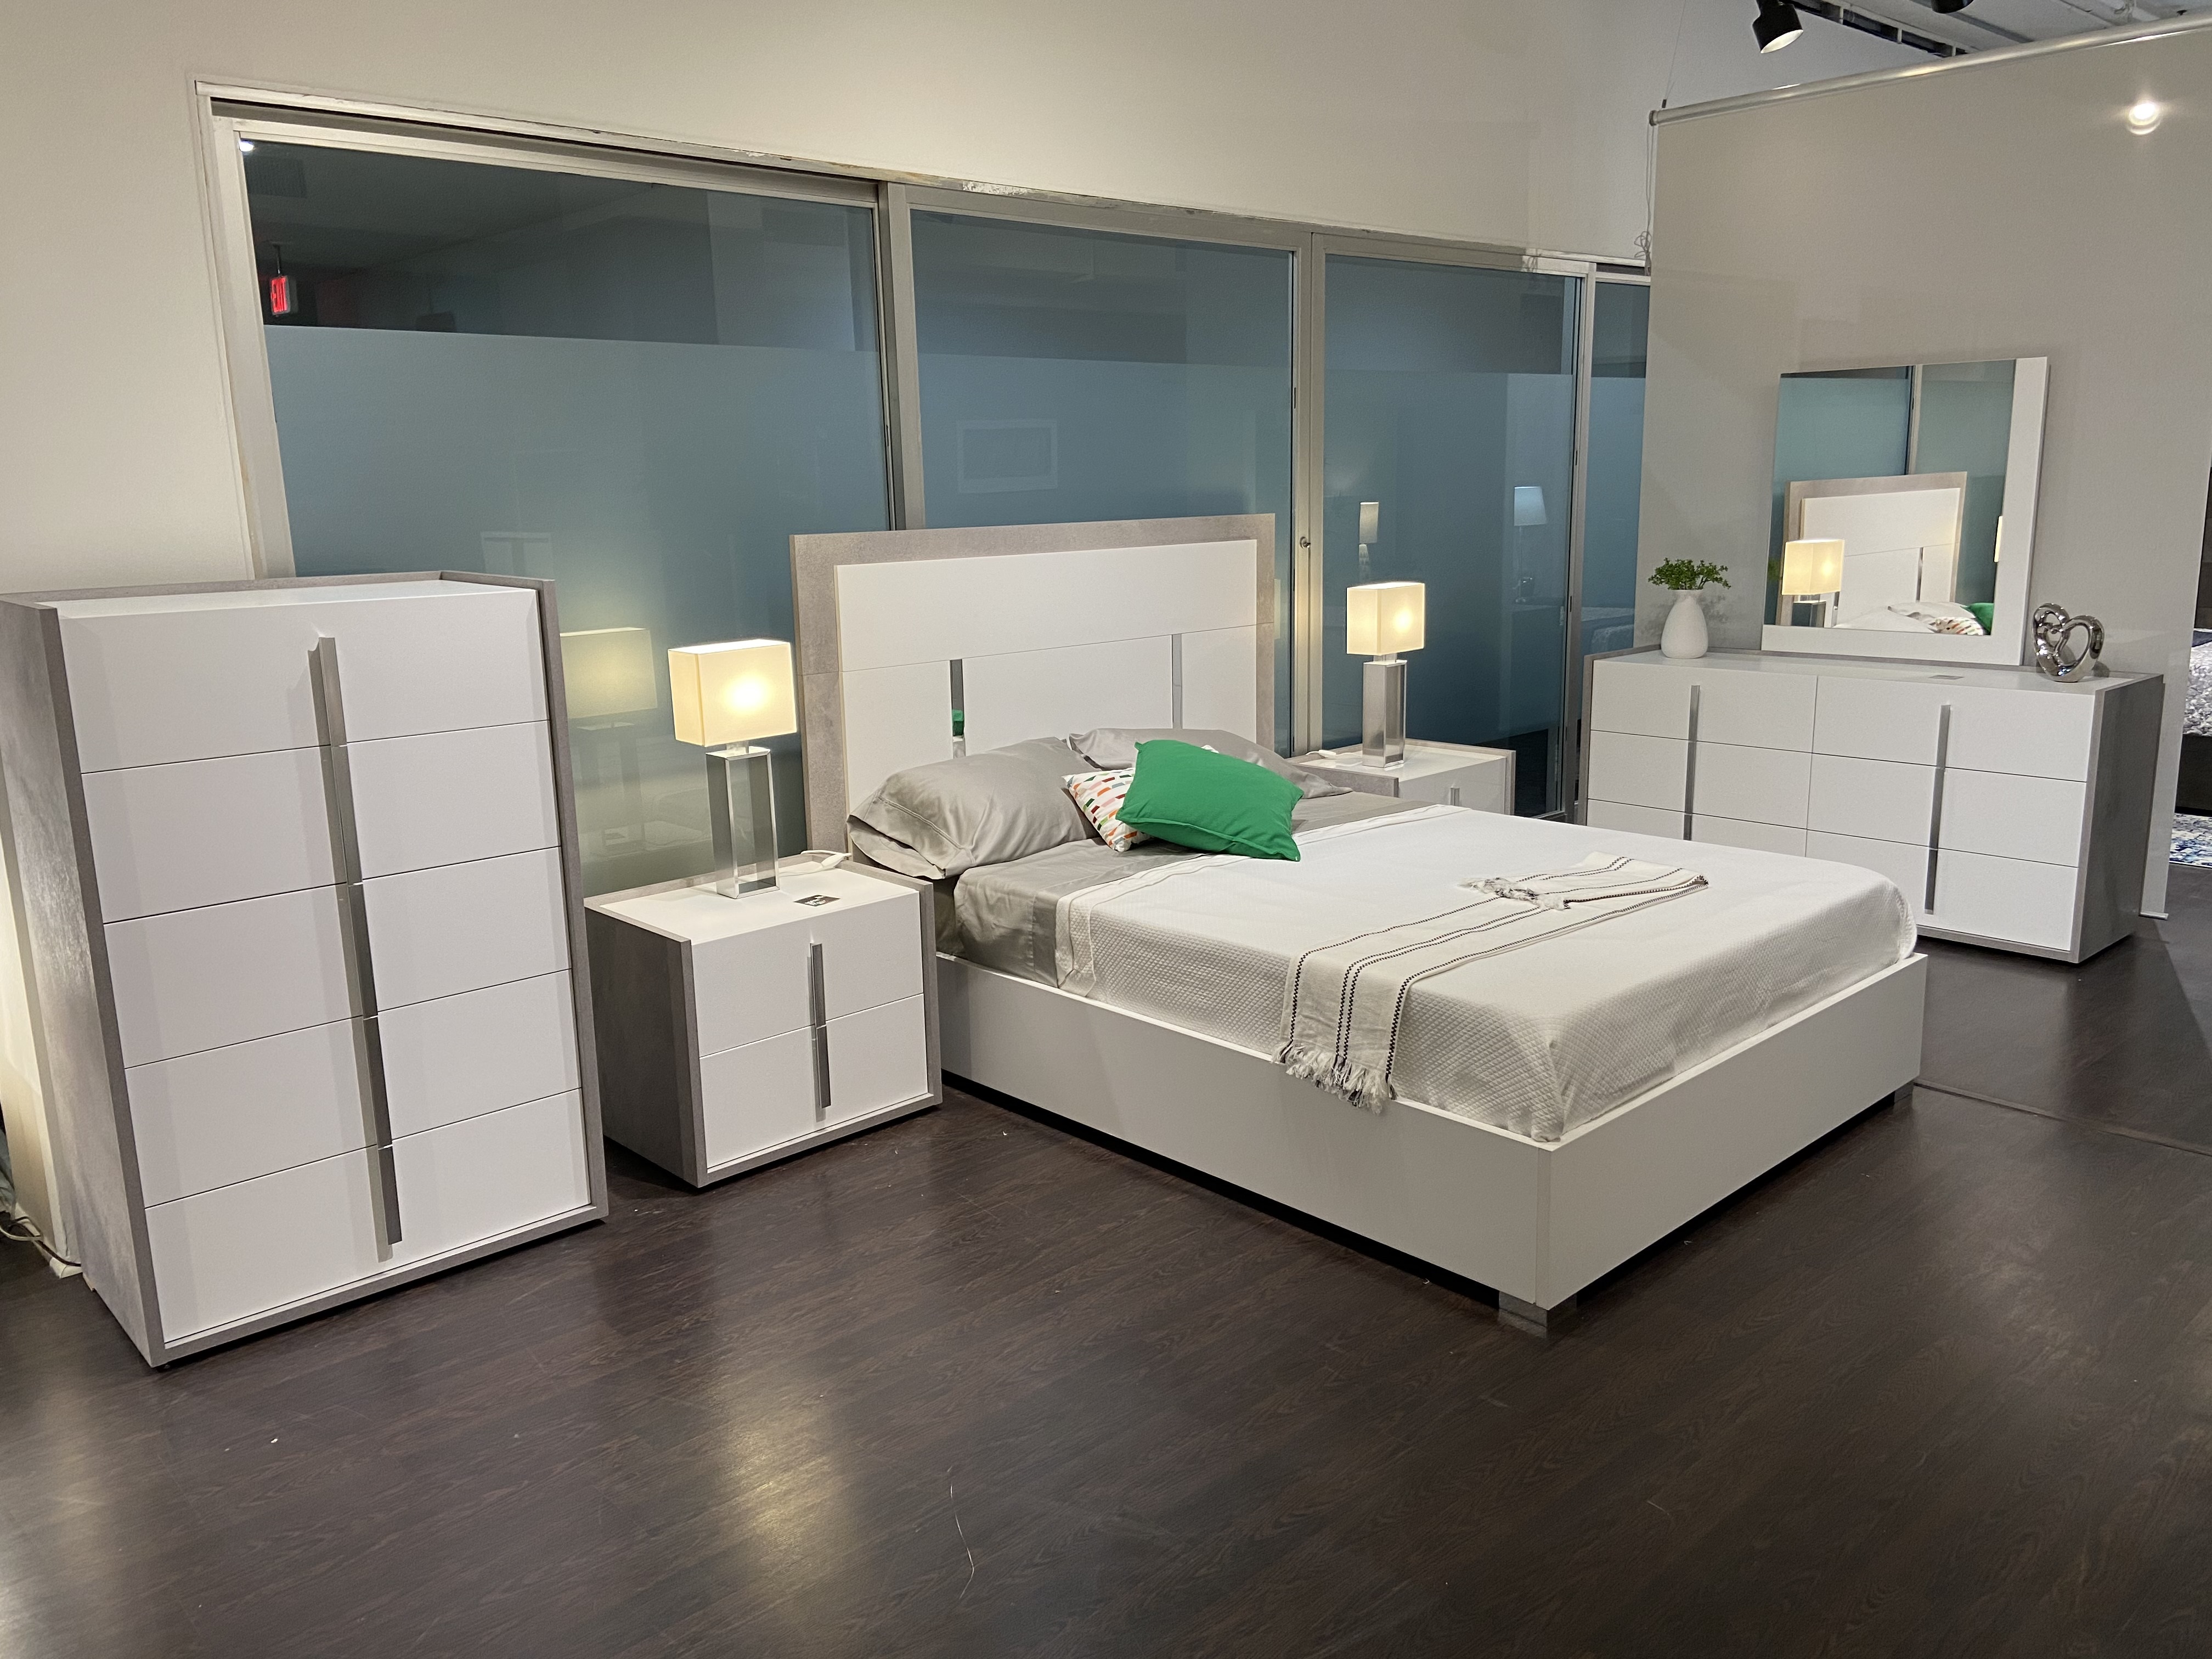 Fashionable Wood Modern Contemporary Bedroom Sets